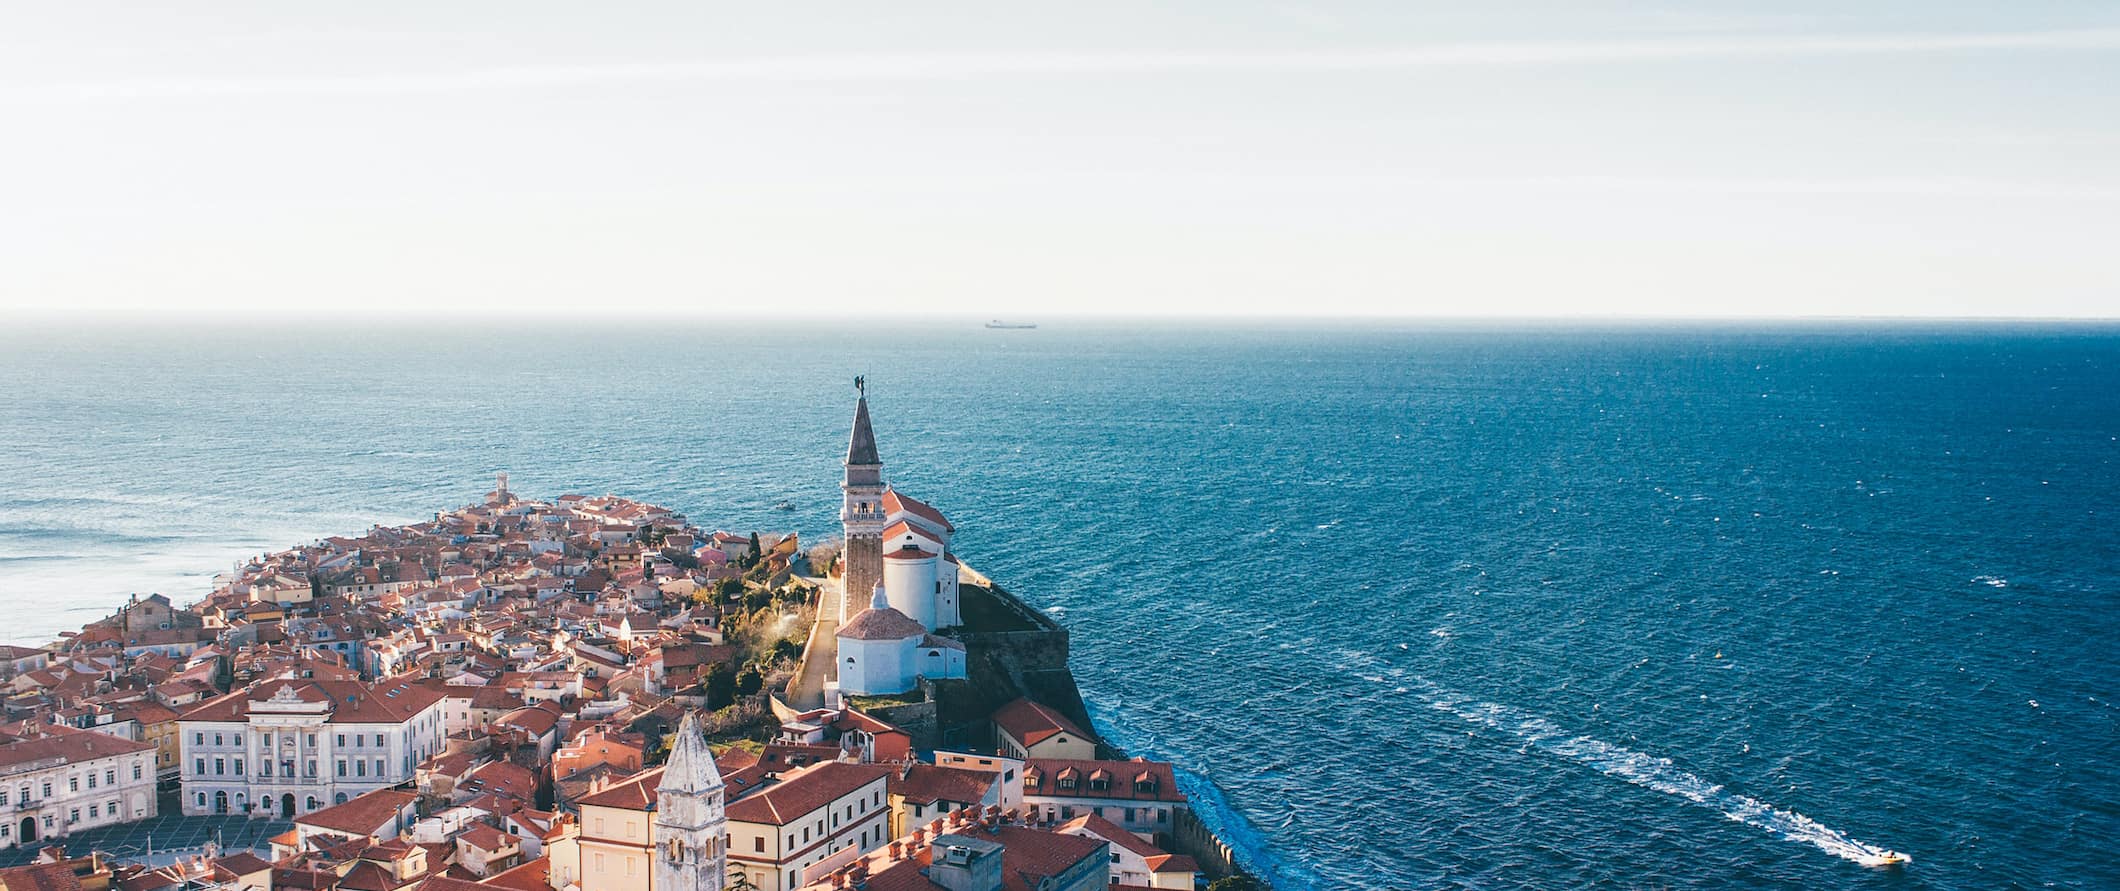 The beautiful sea-side town of Piran along the coast of Slovenia on a bright summer day